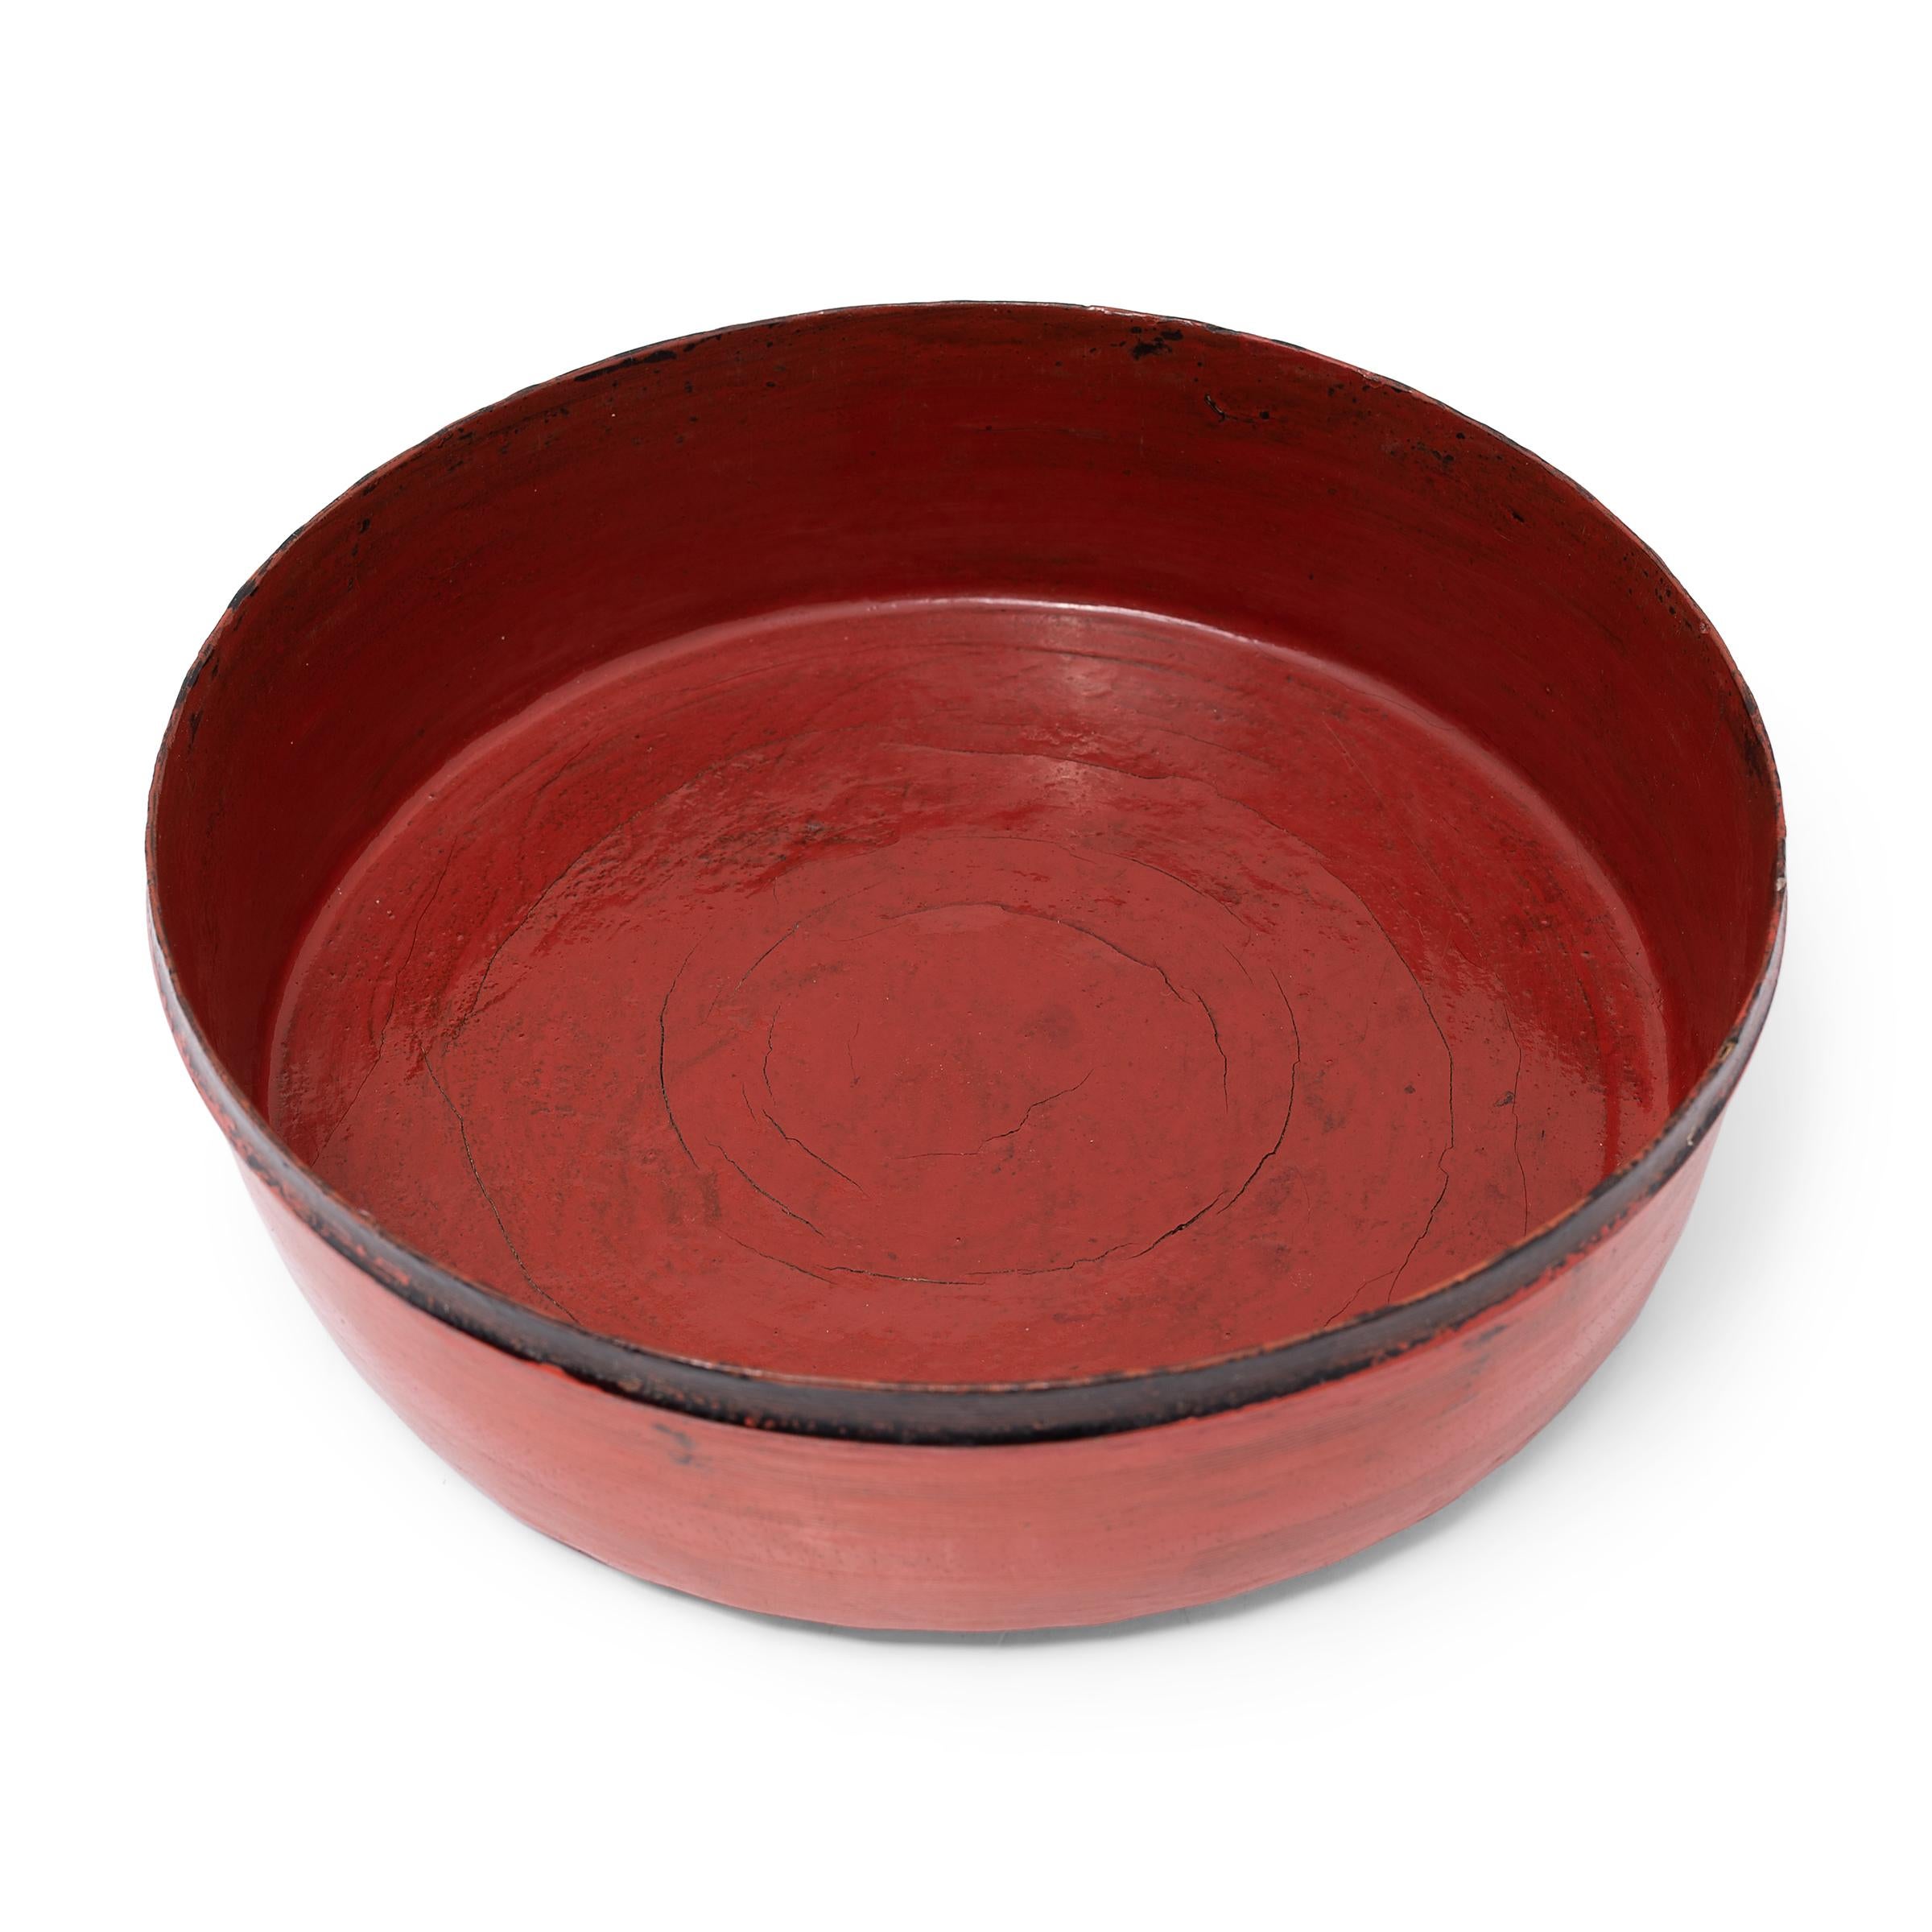 This round tray dates to the early 20th century and is a simple example of Burmese lacquerware. The tray is formed of thin bamboo strips that have been woven and coiled into shape, held in place with a putty of lacquer and sawdust, and finished with